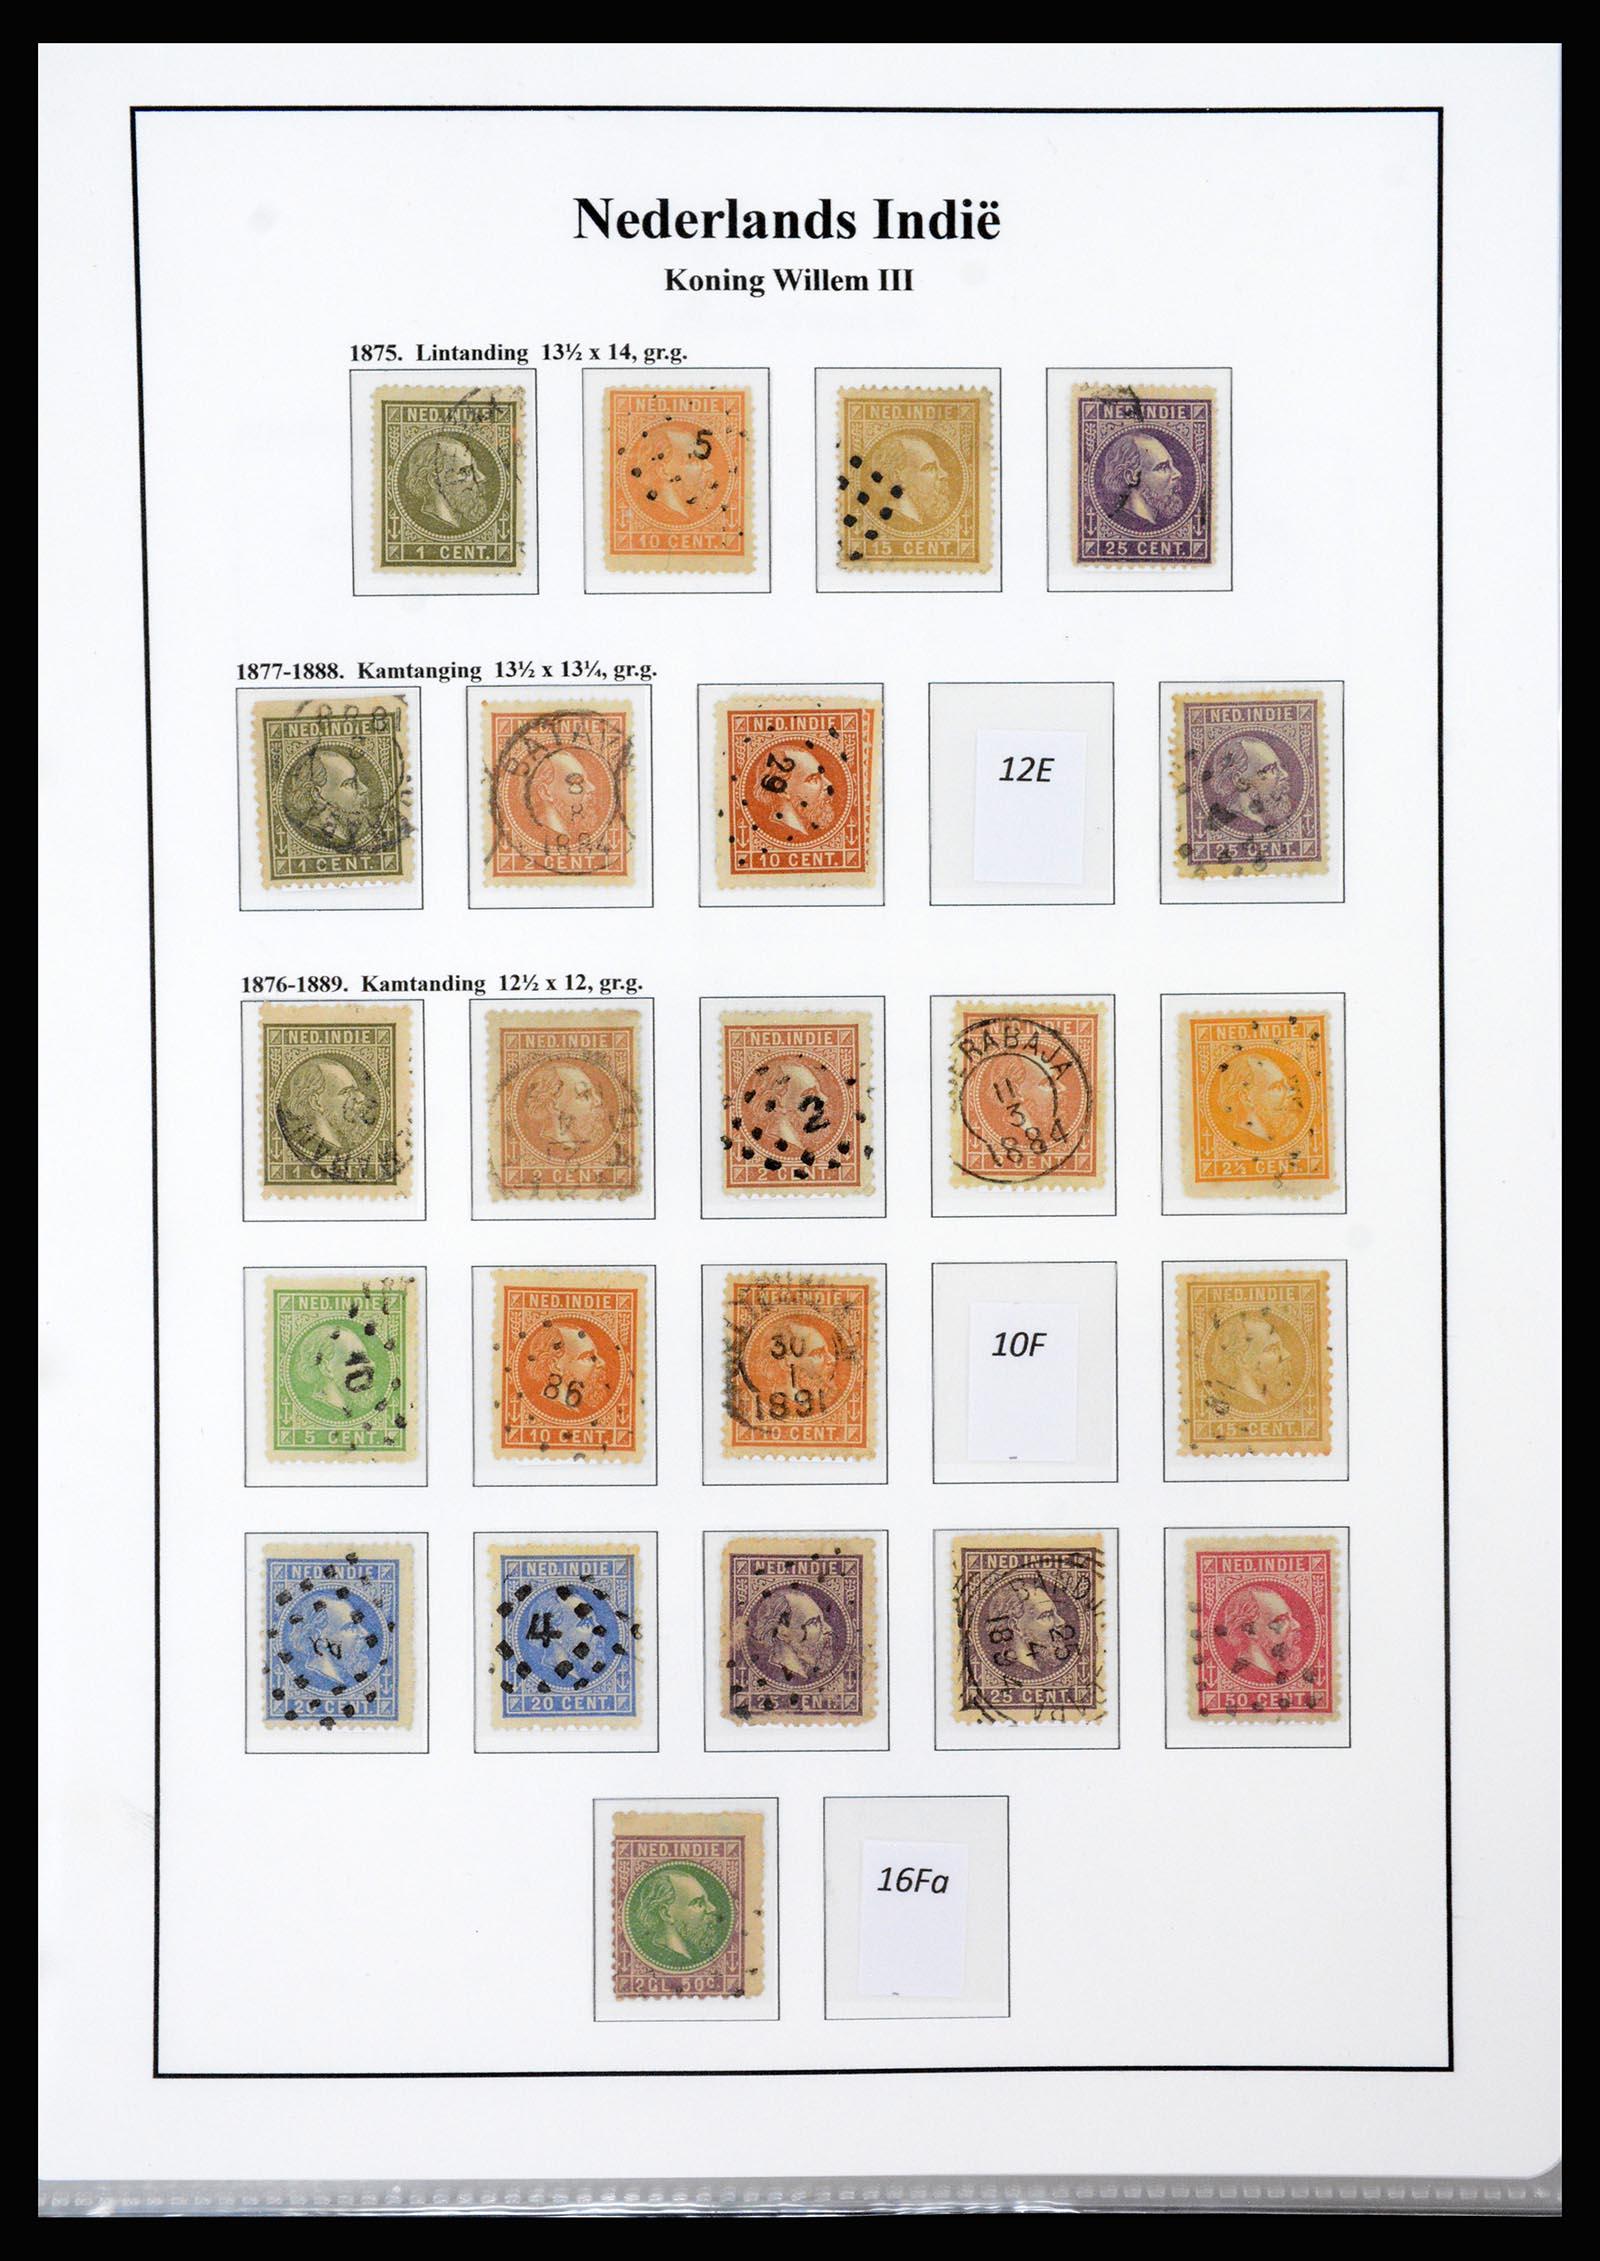 37247 002 - Stamp collection 37247 Dutch east Indies 1864-1949.